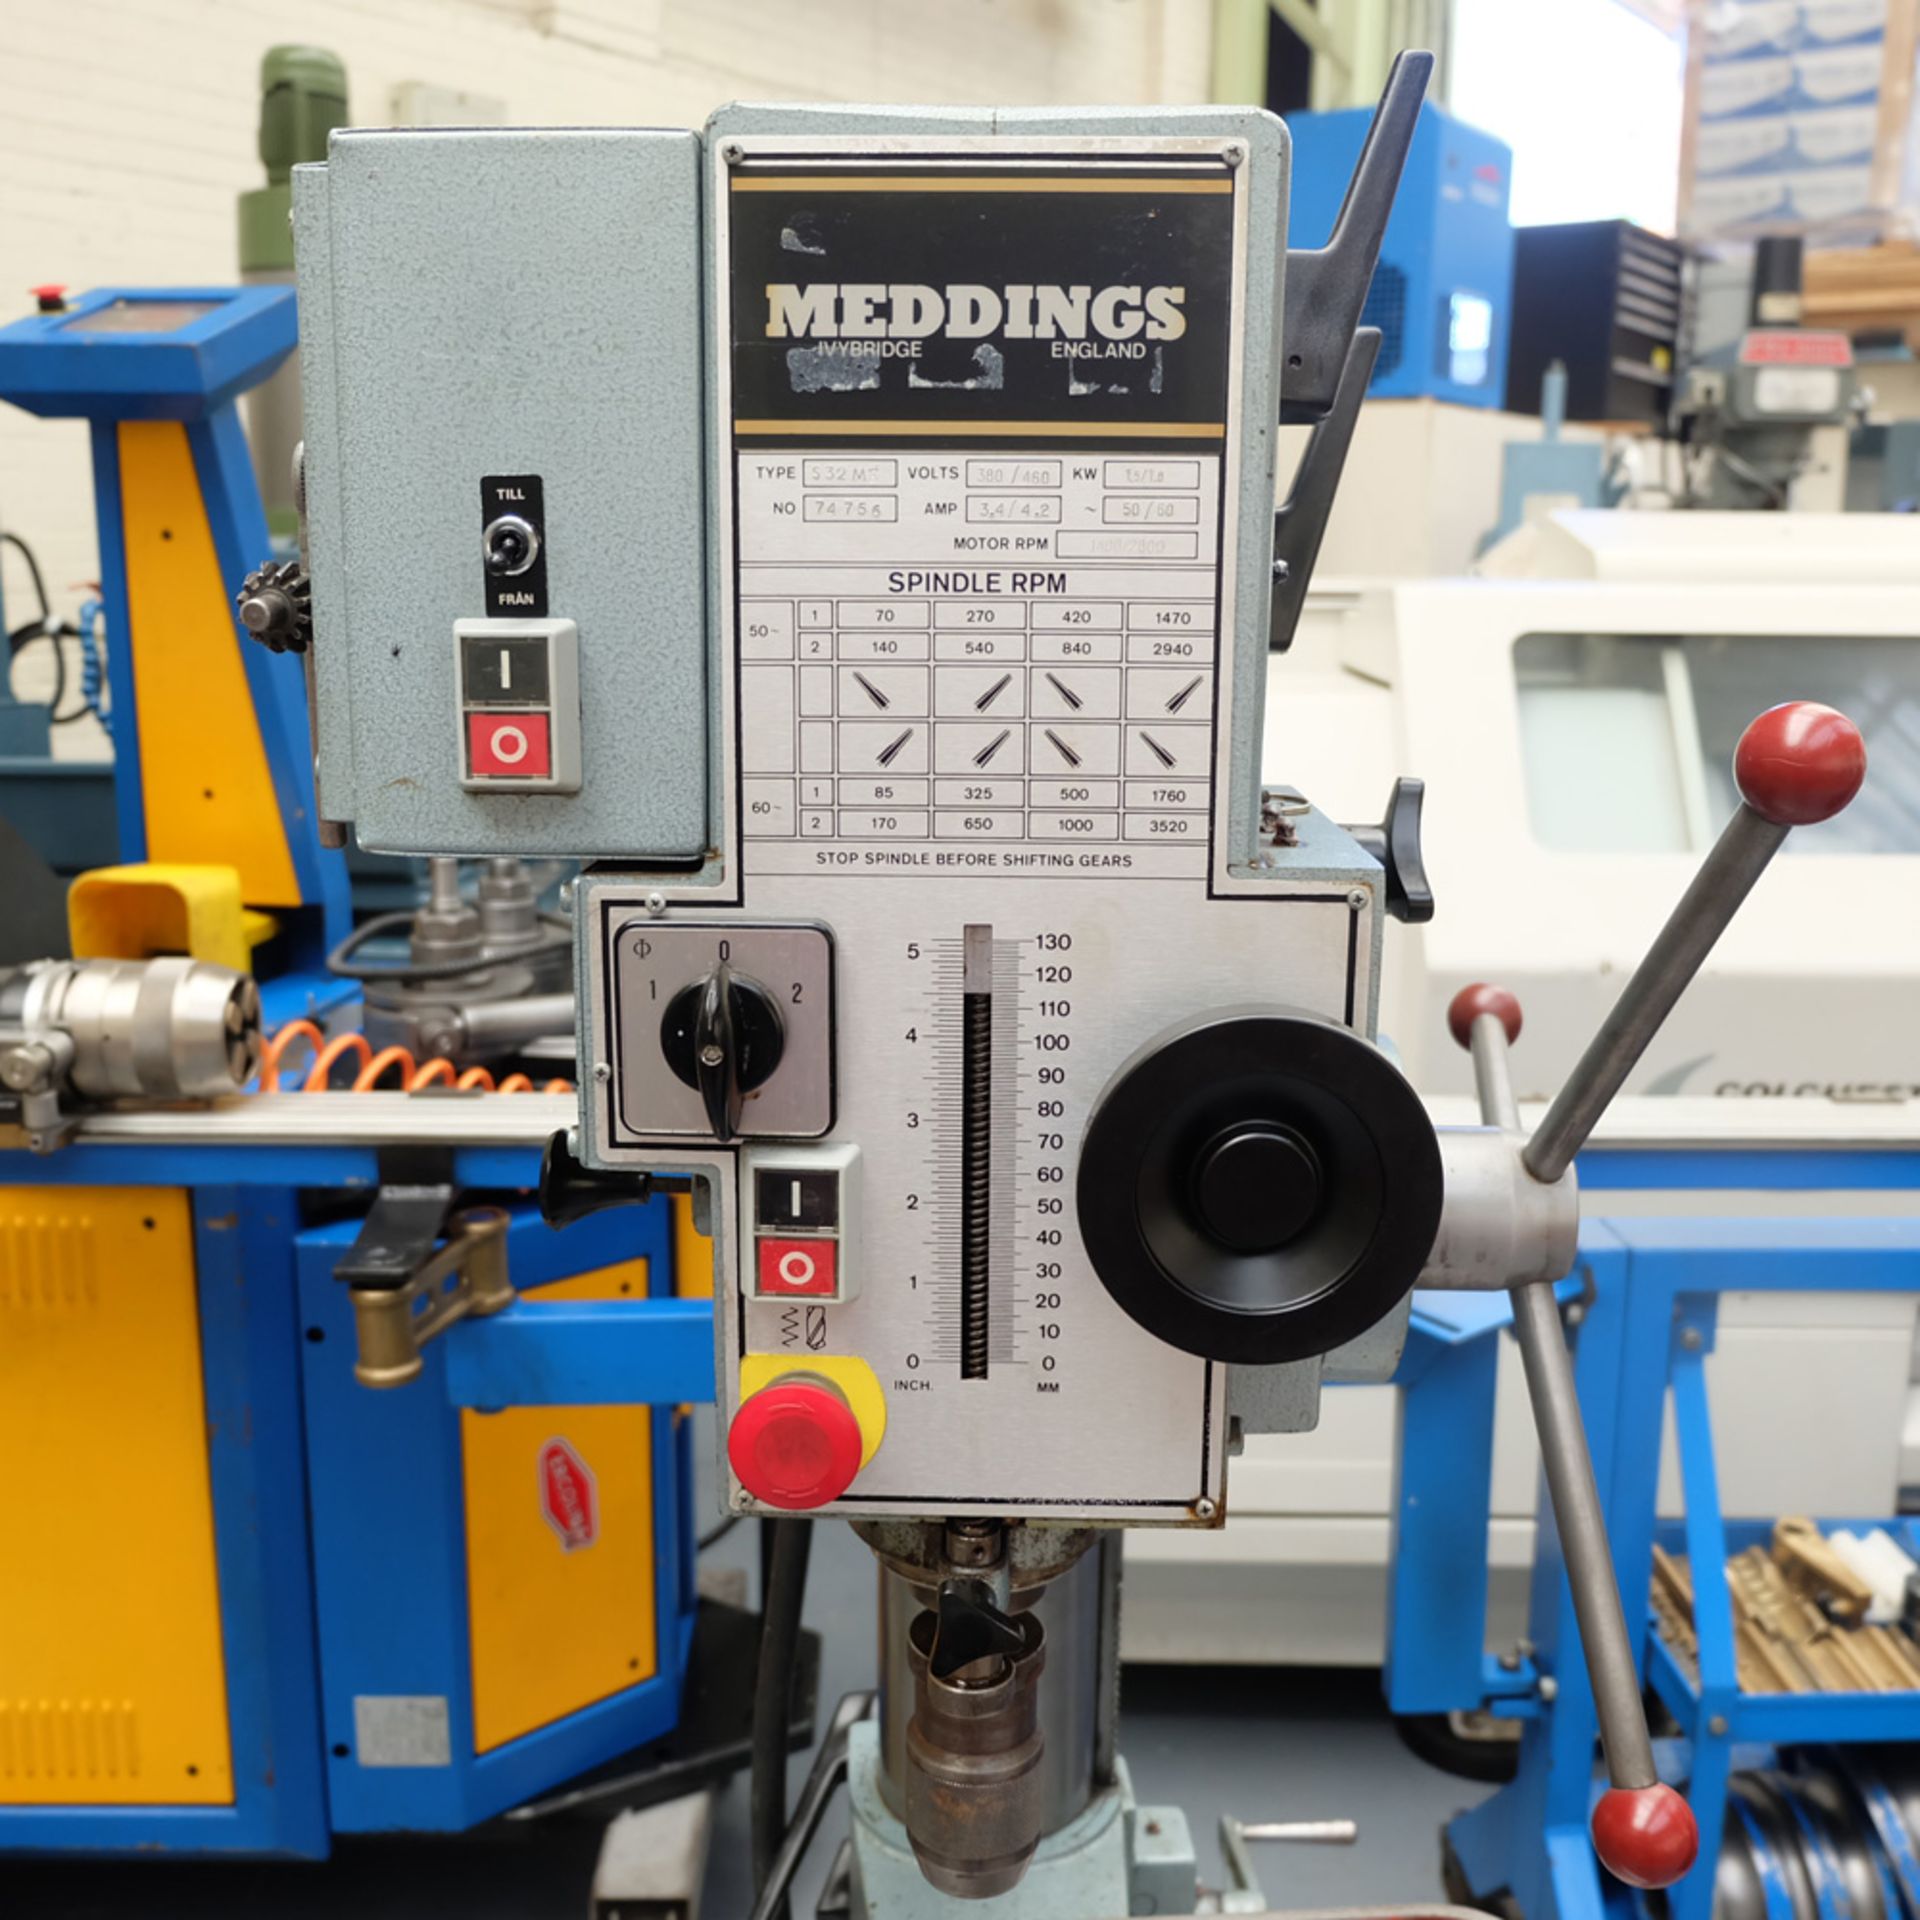 Meddings Type S32 ME Geared Head Pedestal Drilling Machine. Table 500mm x 350mm. - Image 3 of 9